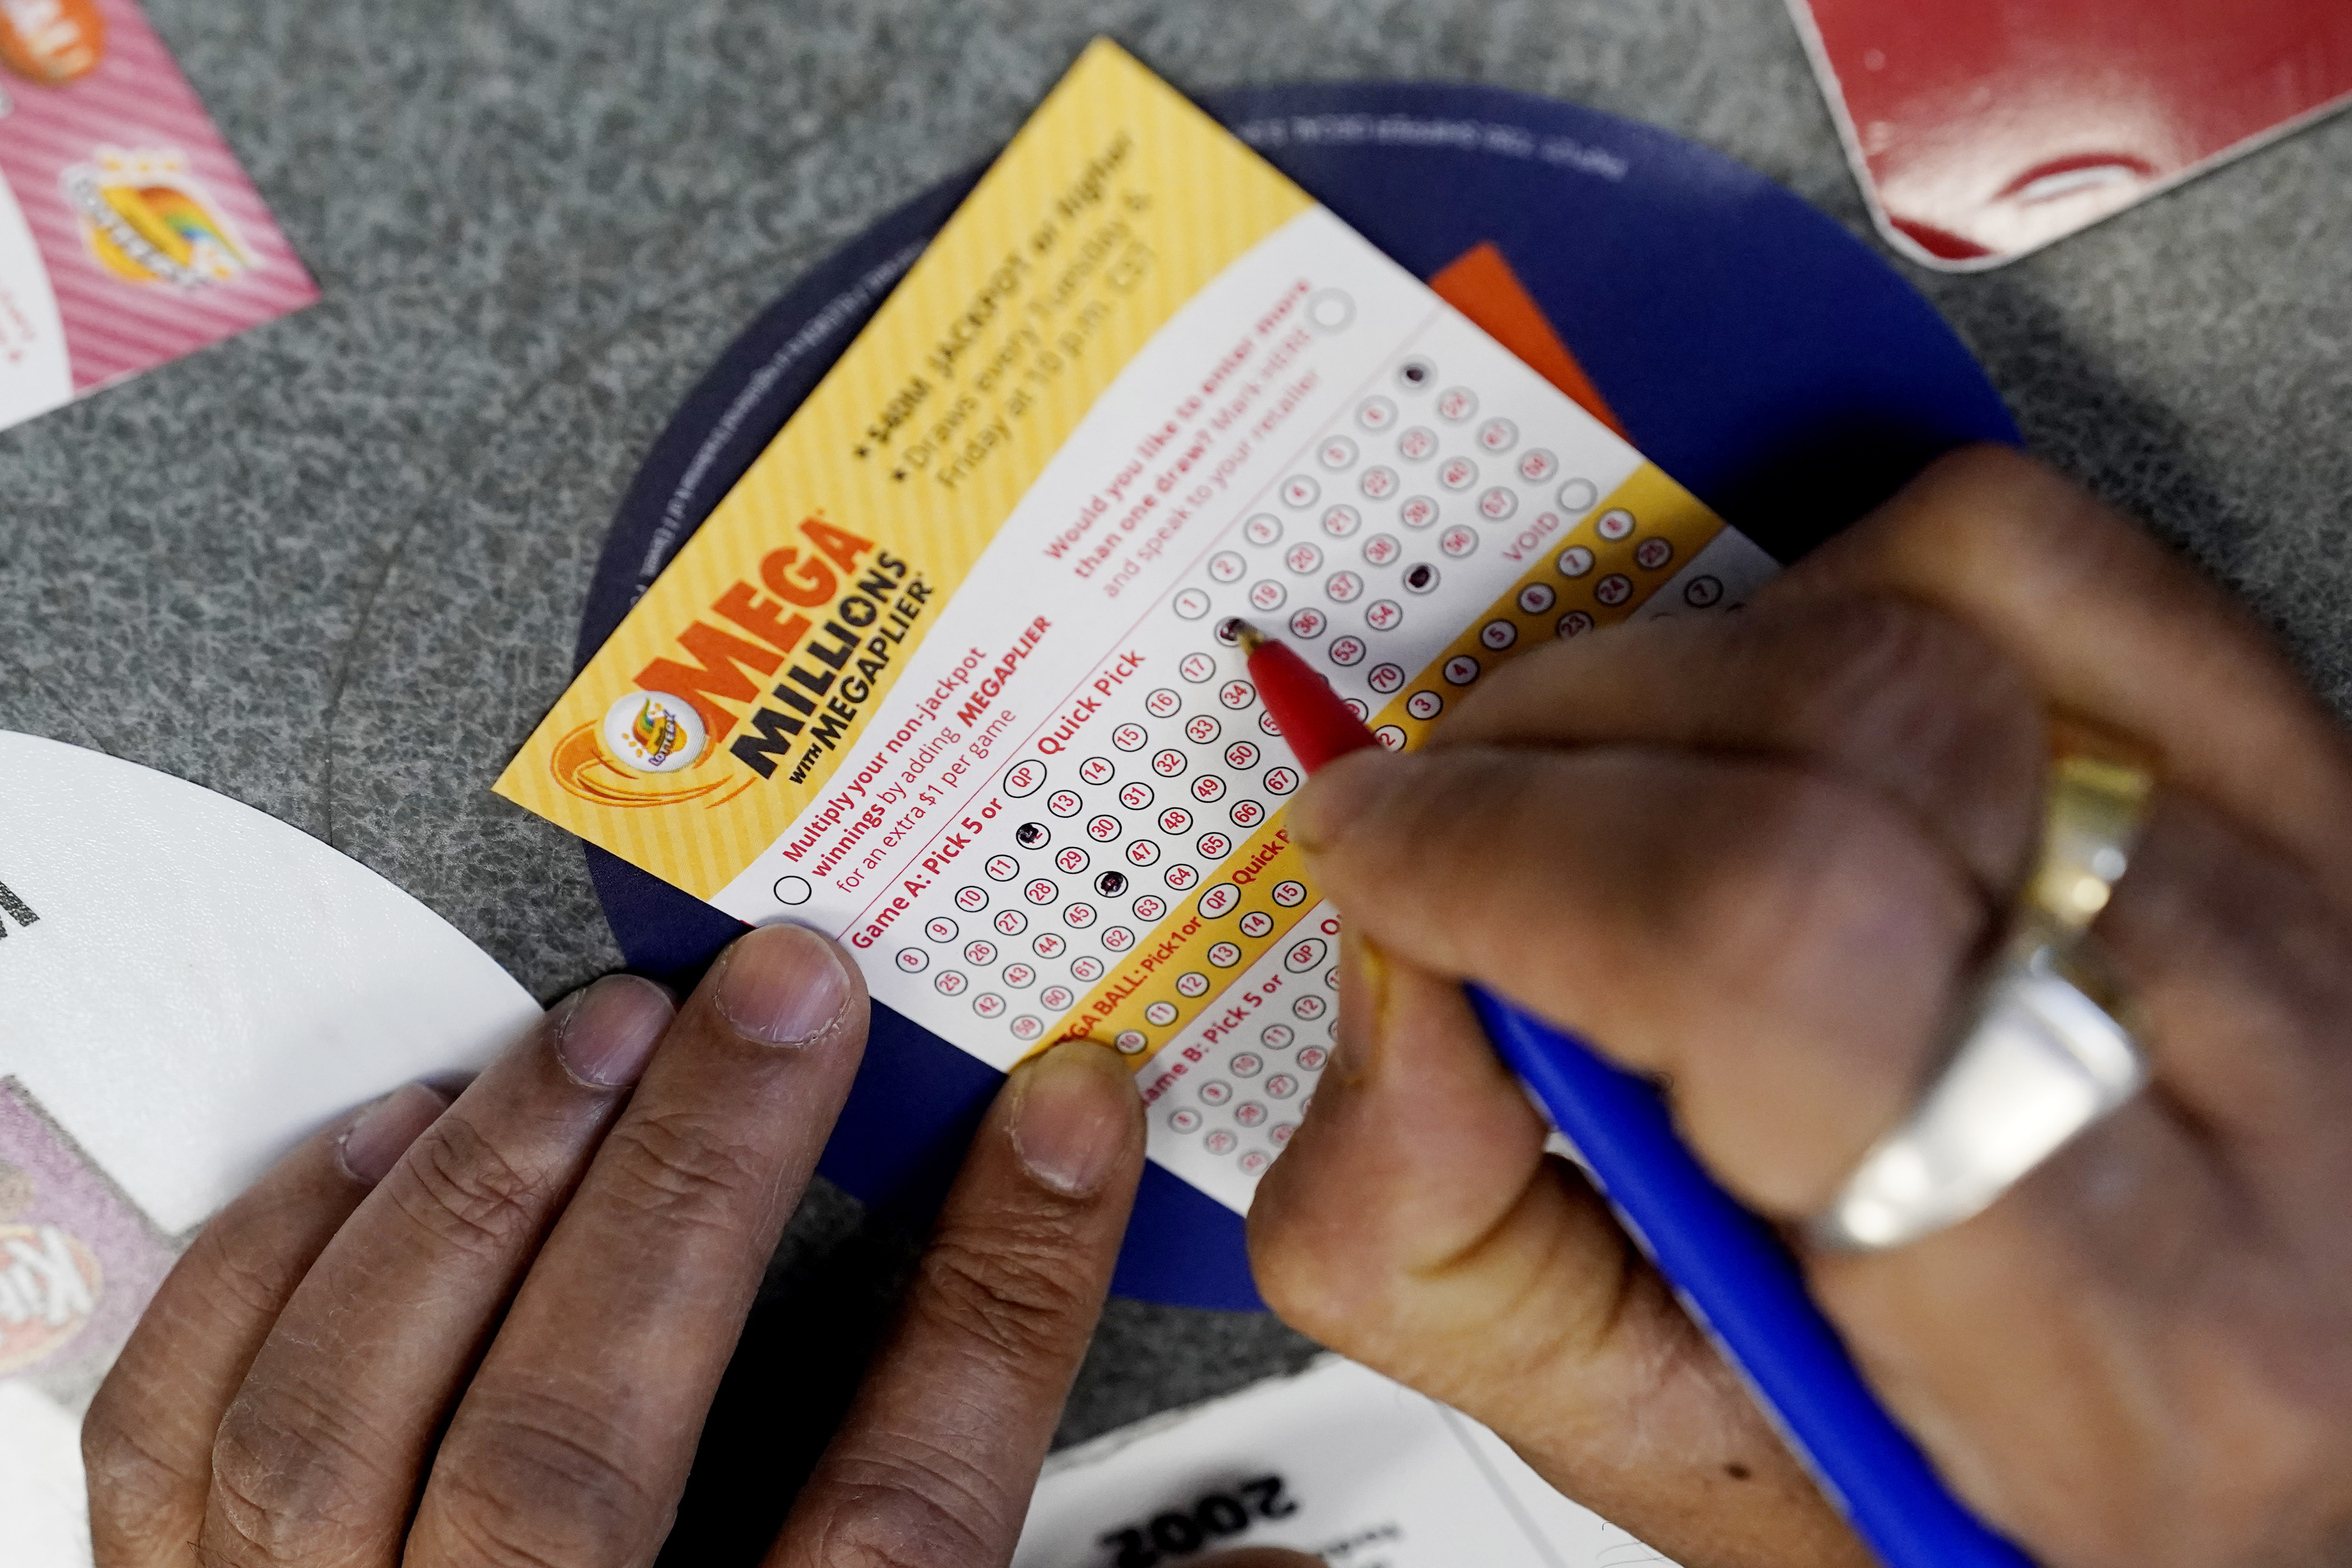 A customer fills out a Mega Millions lottery ticket at a convenience store in Northbrook, Illinois.  (AP Photo/Nam Y. Huh, File)